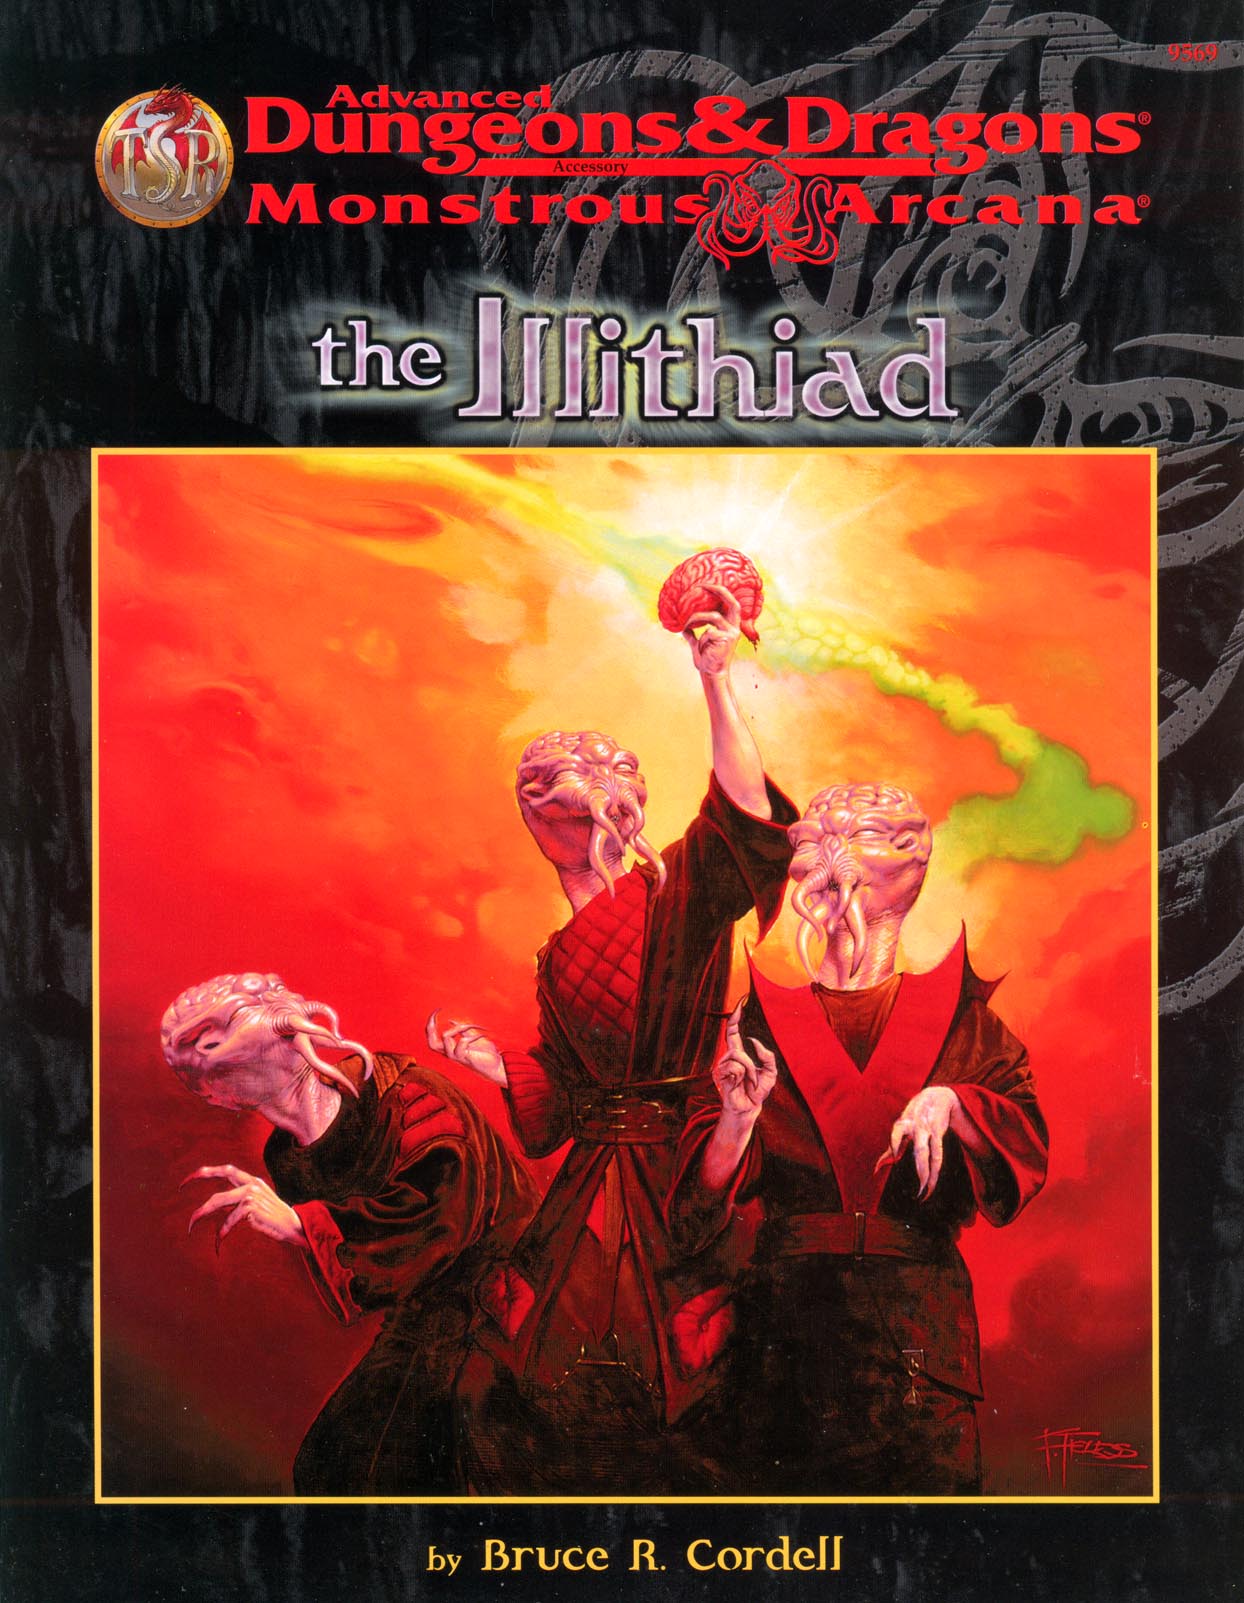 The IllithiadCover art